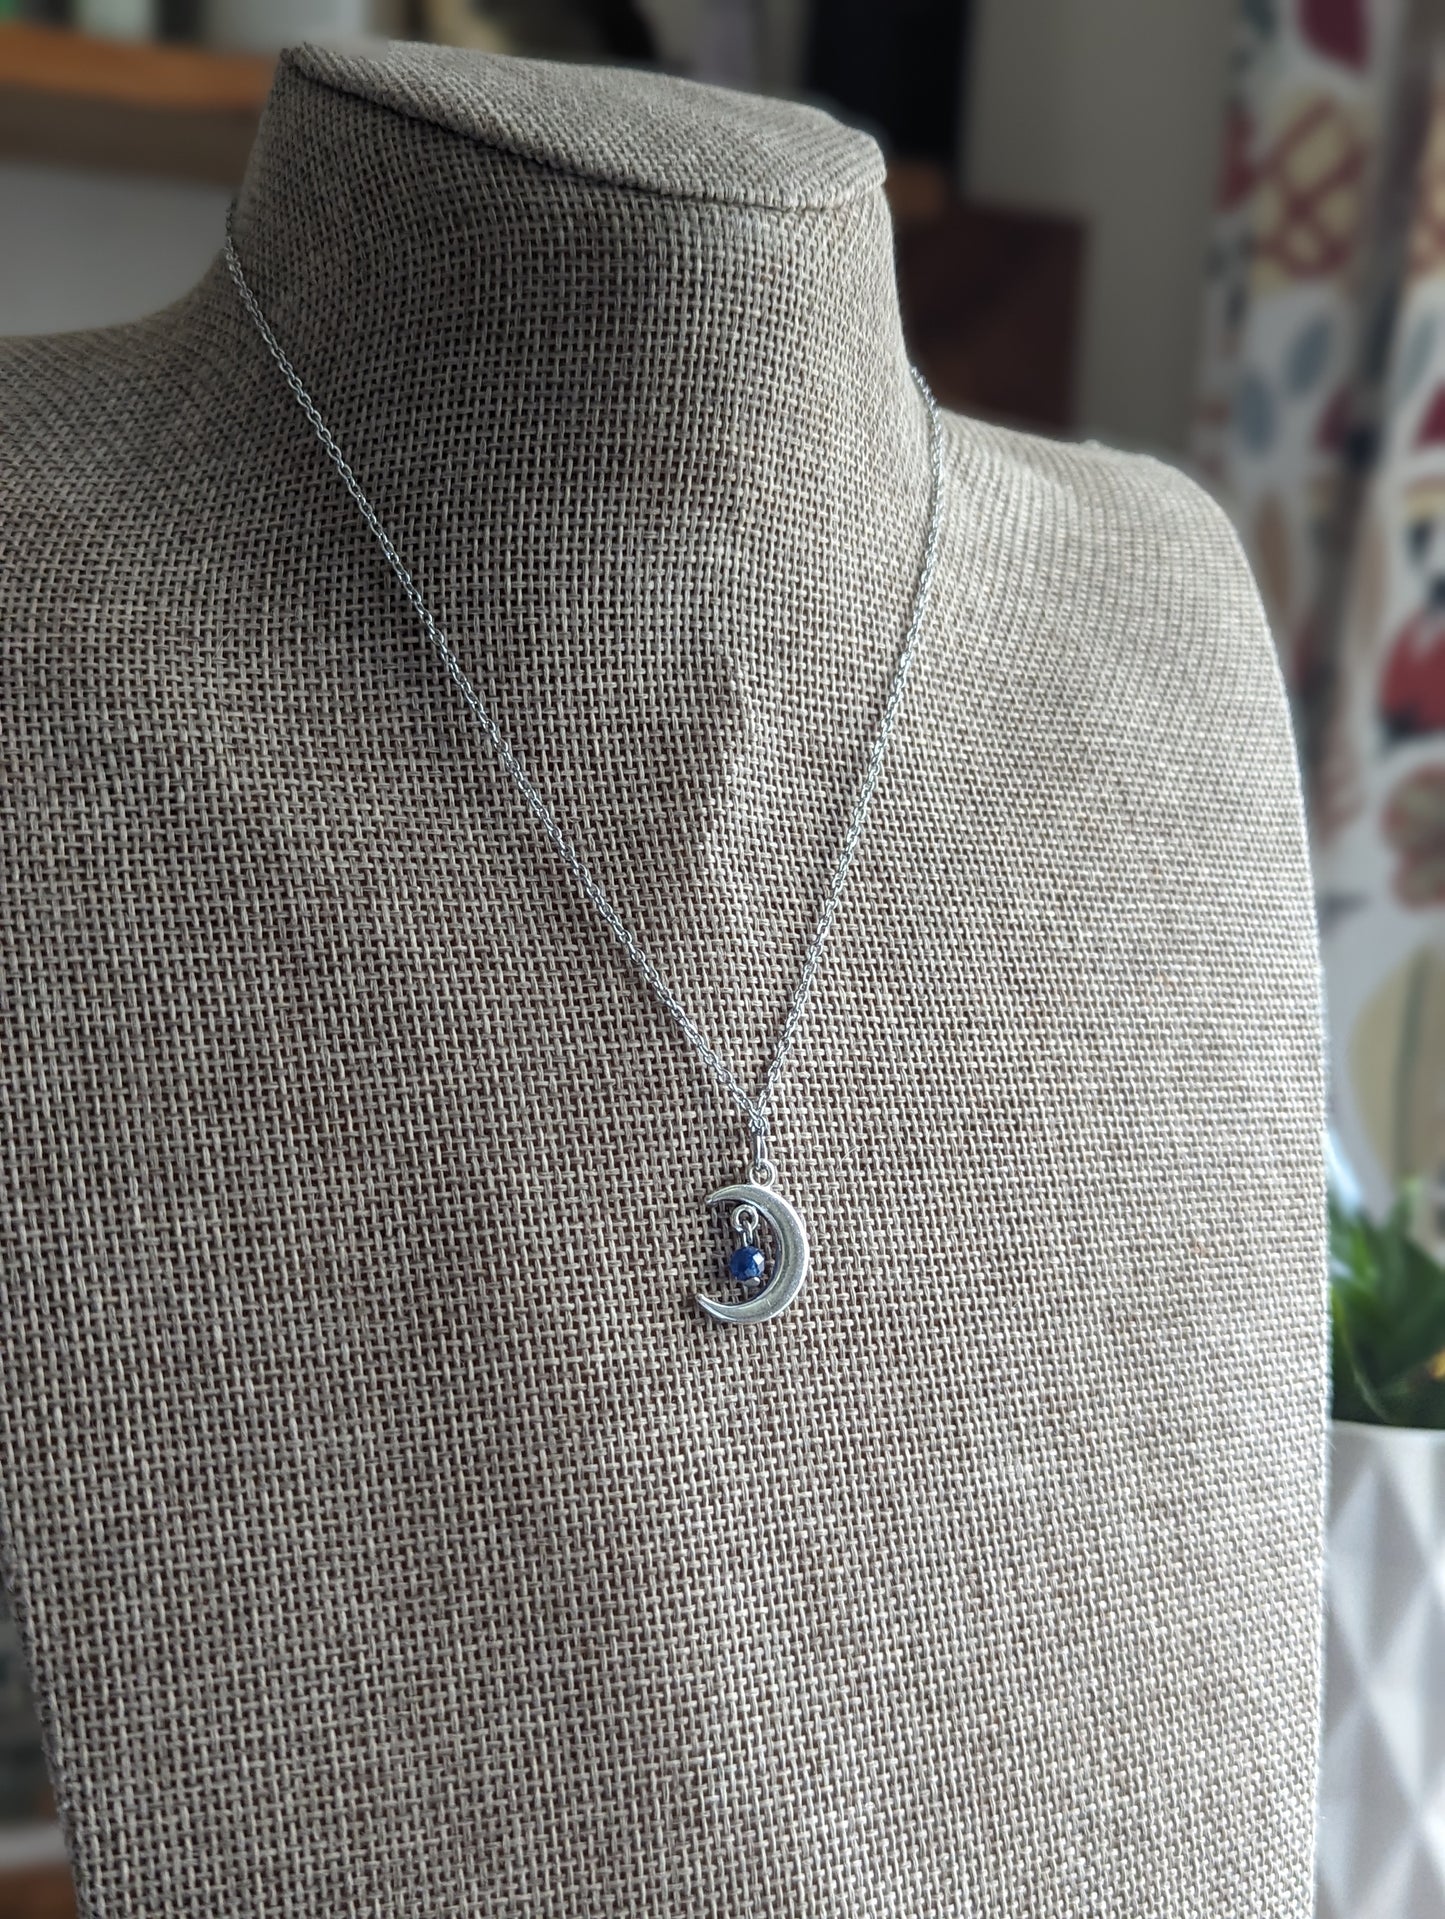 Blue Kyanite Silver Crescent Moon Necklace